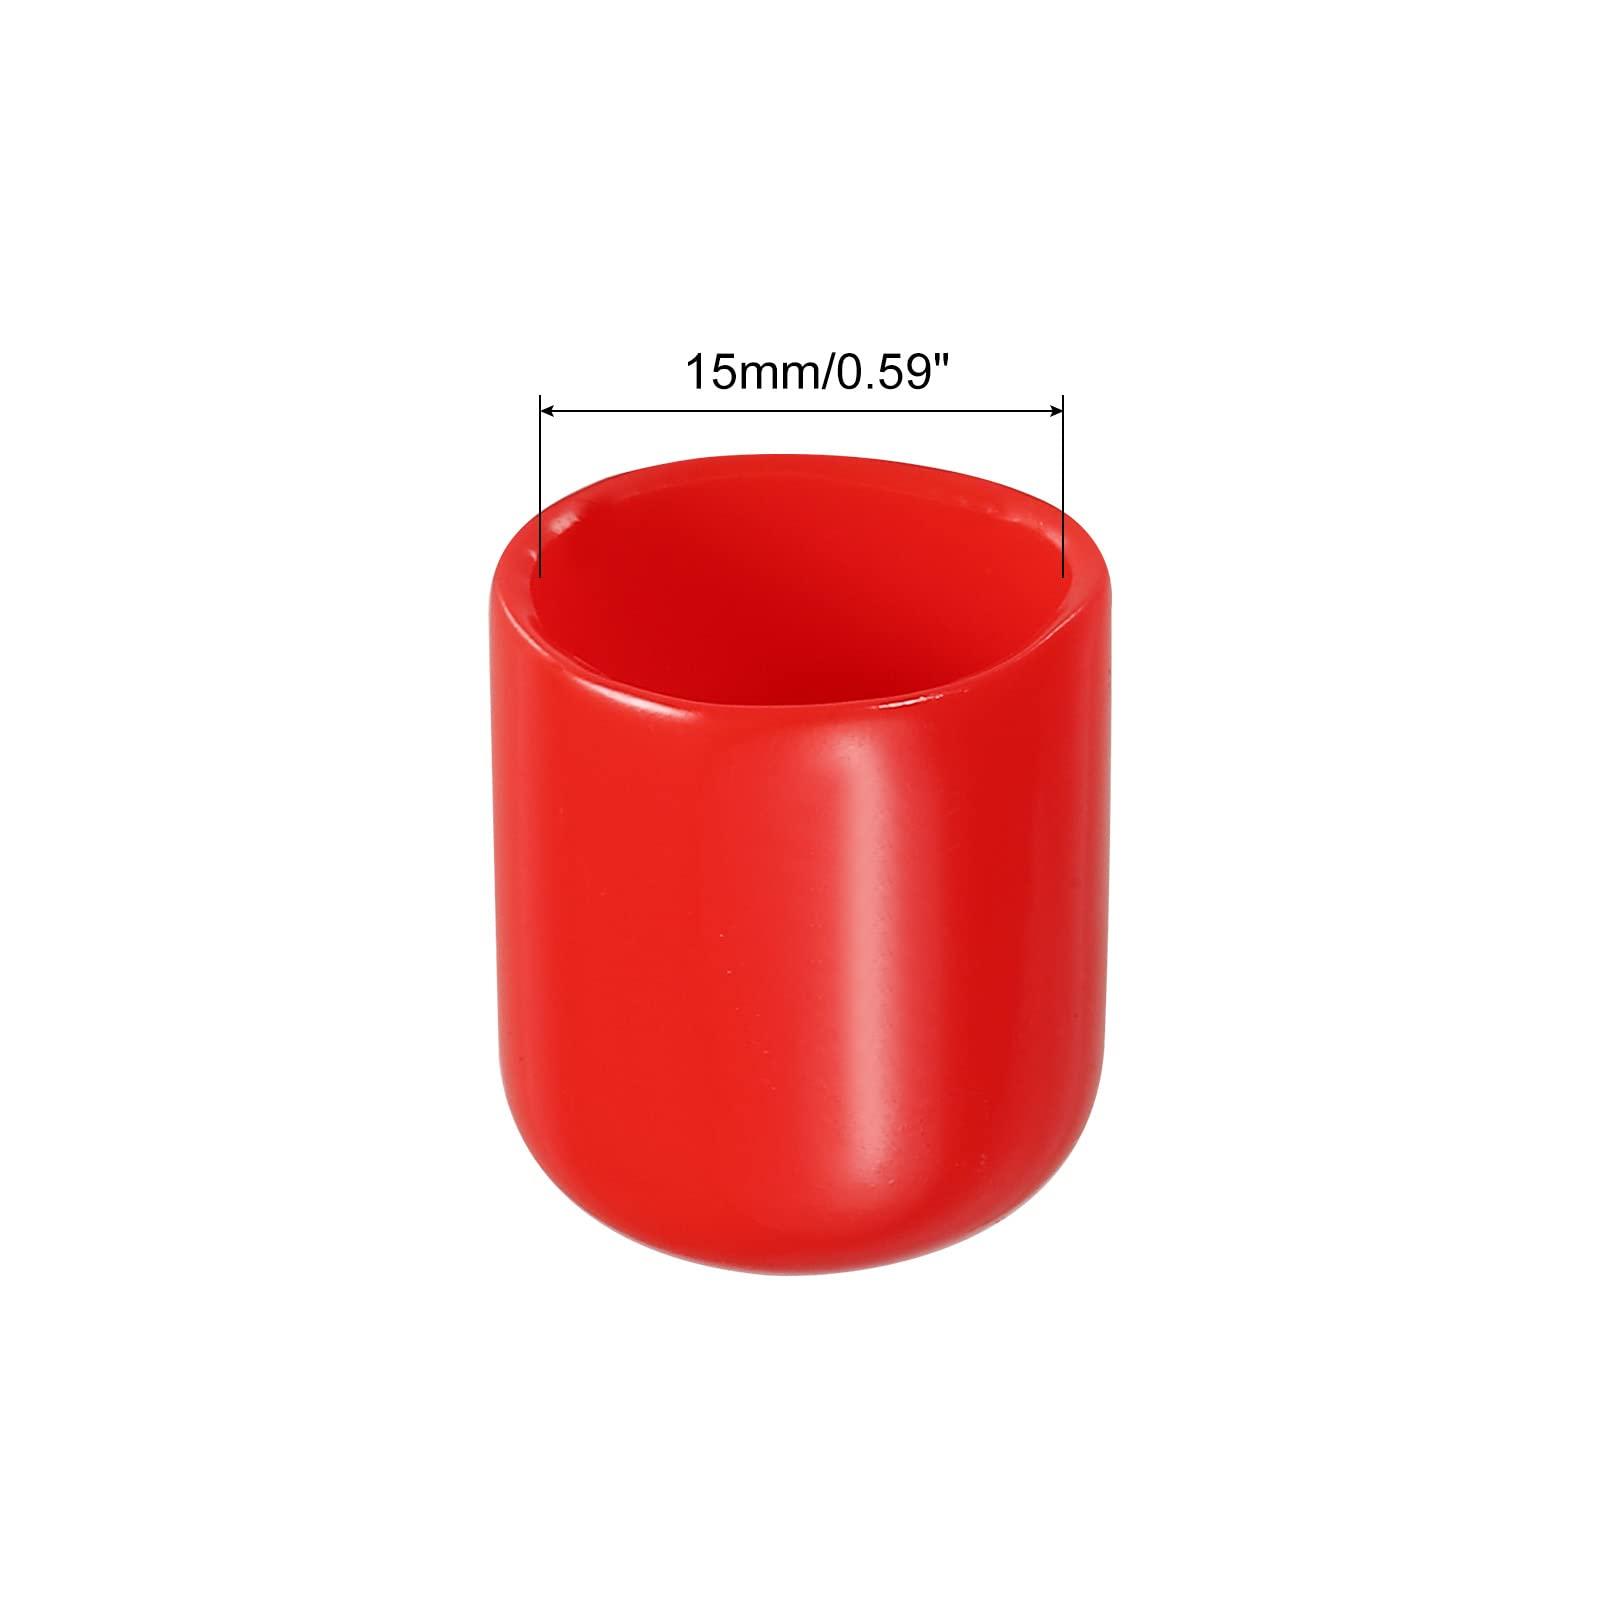 sourcing map 100pcs Rubber End Caps Cover Assortment 15mm PVC Vinyl Screw Thread Protector for Screw Bolt Black Red 1